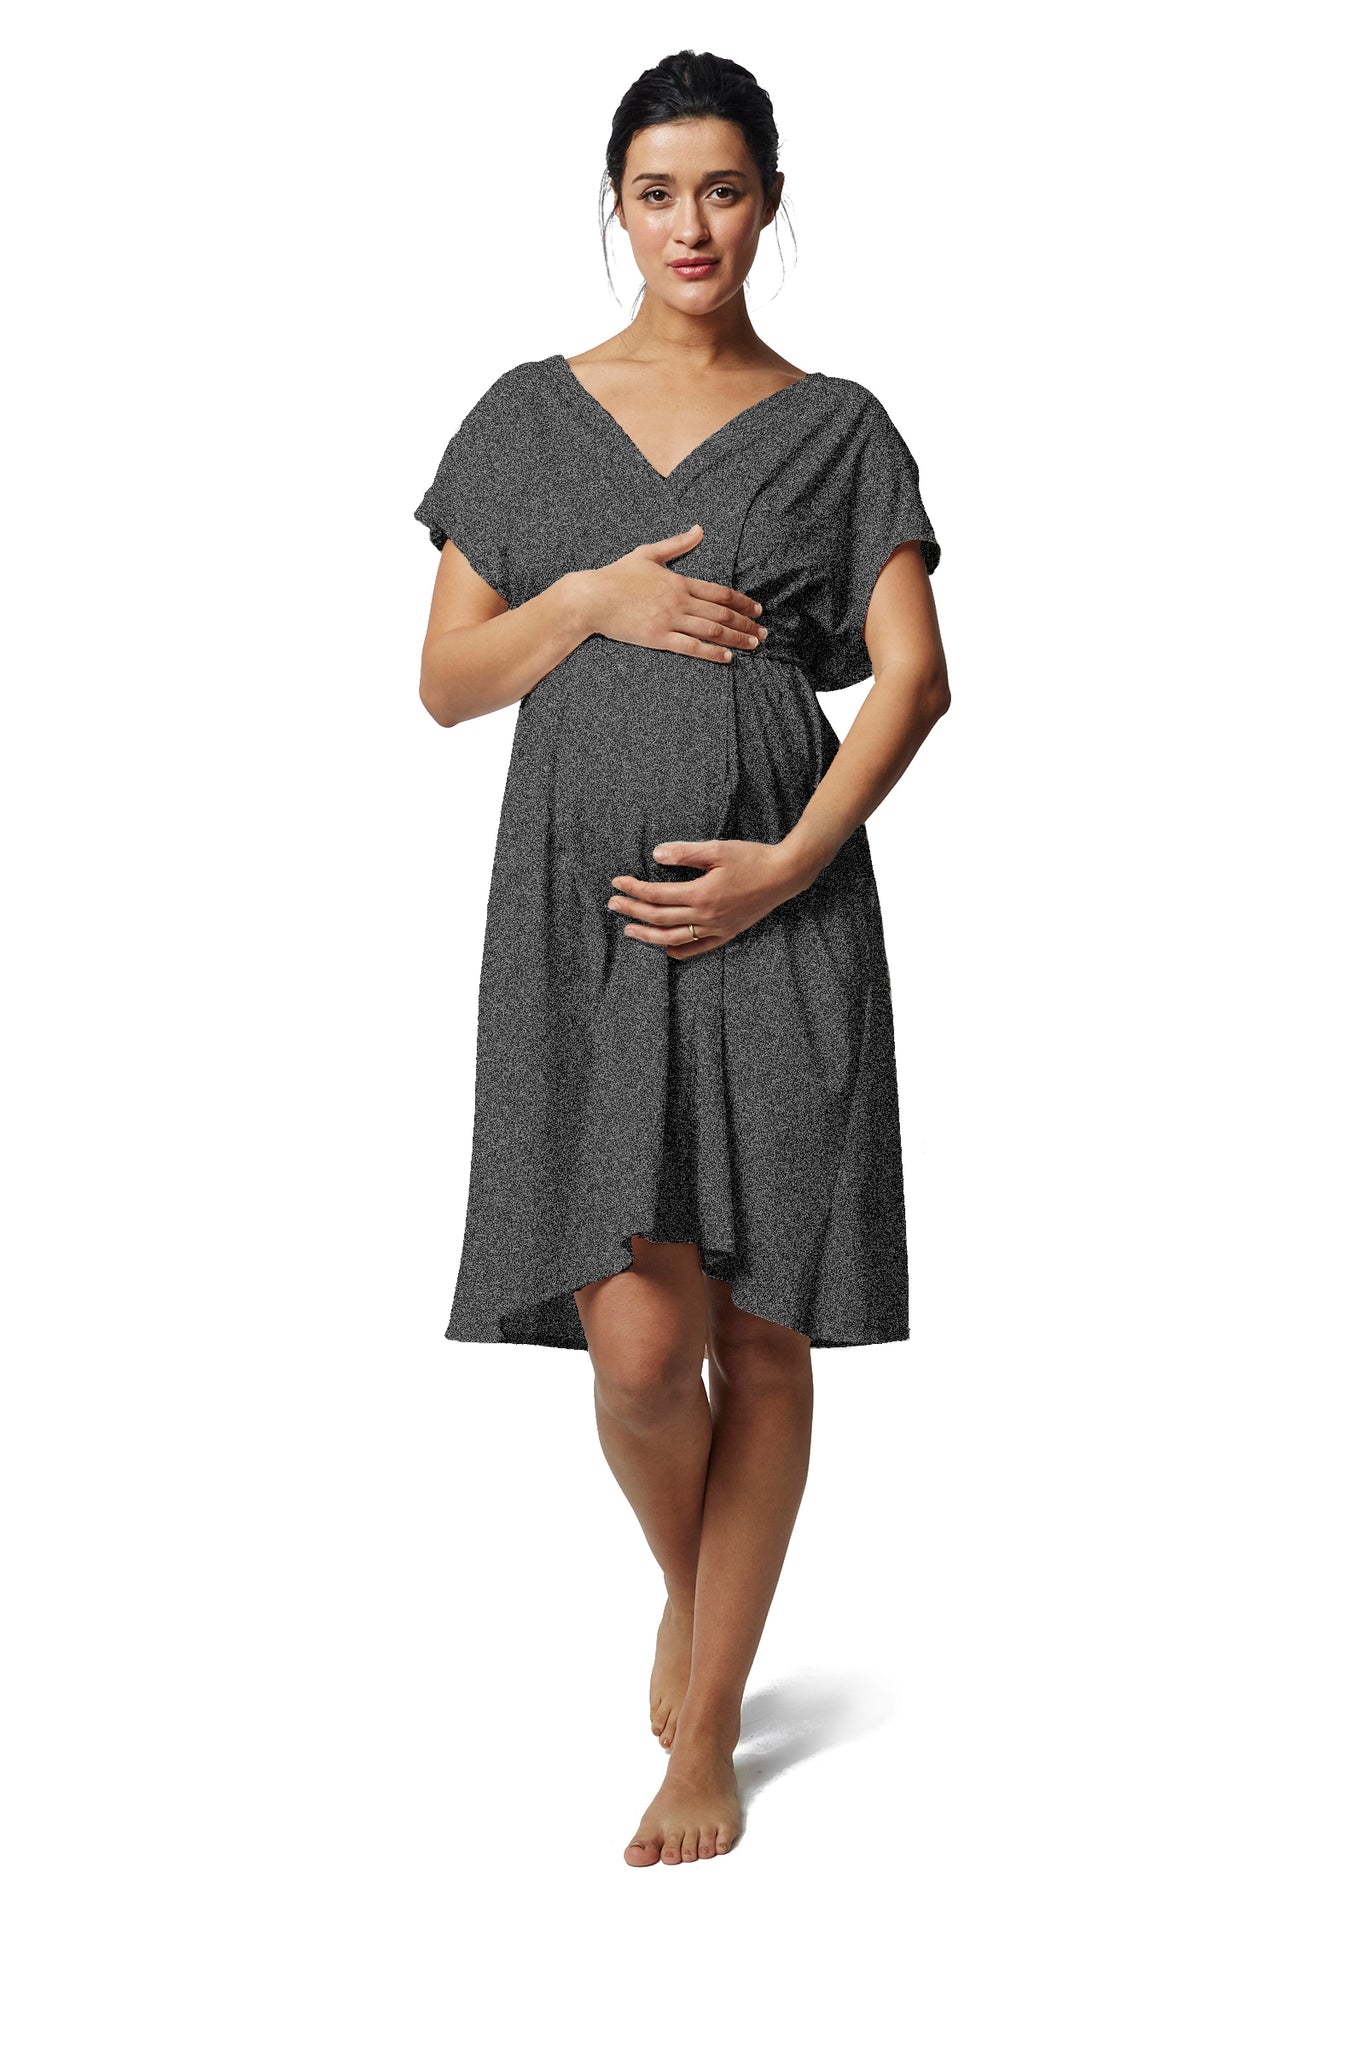 SWOMOG Women Maternity Nursing Robe Labor and Delivery Gown Breastfeeding  Nightgown Postpartum Robe Sets for Hospital Bathrobe at Amazon Women's  Clothing store